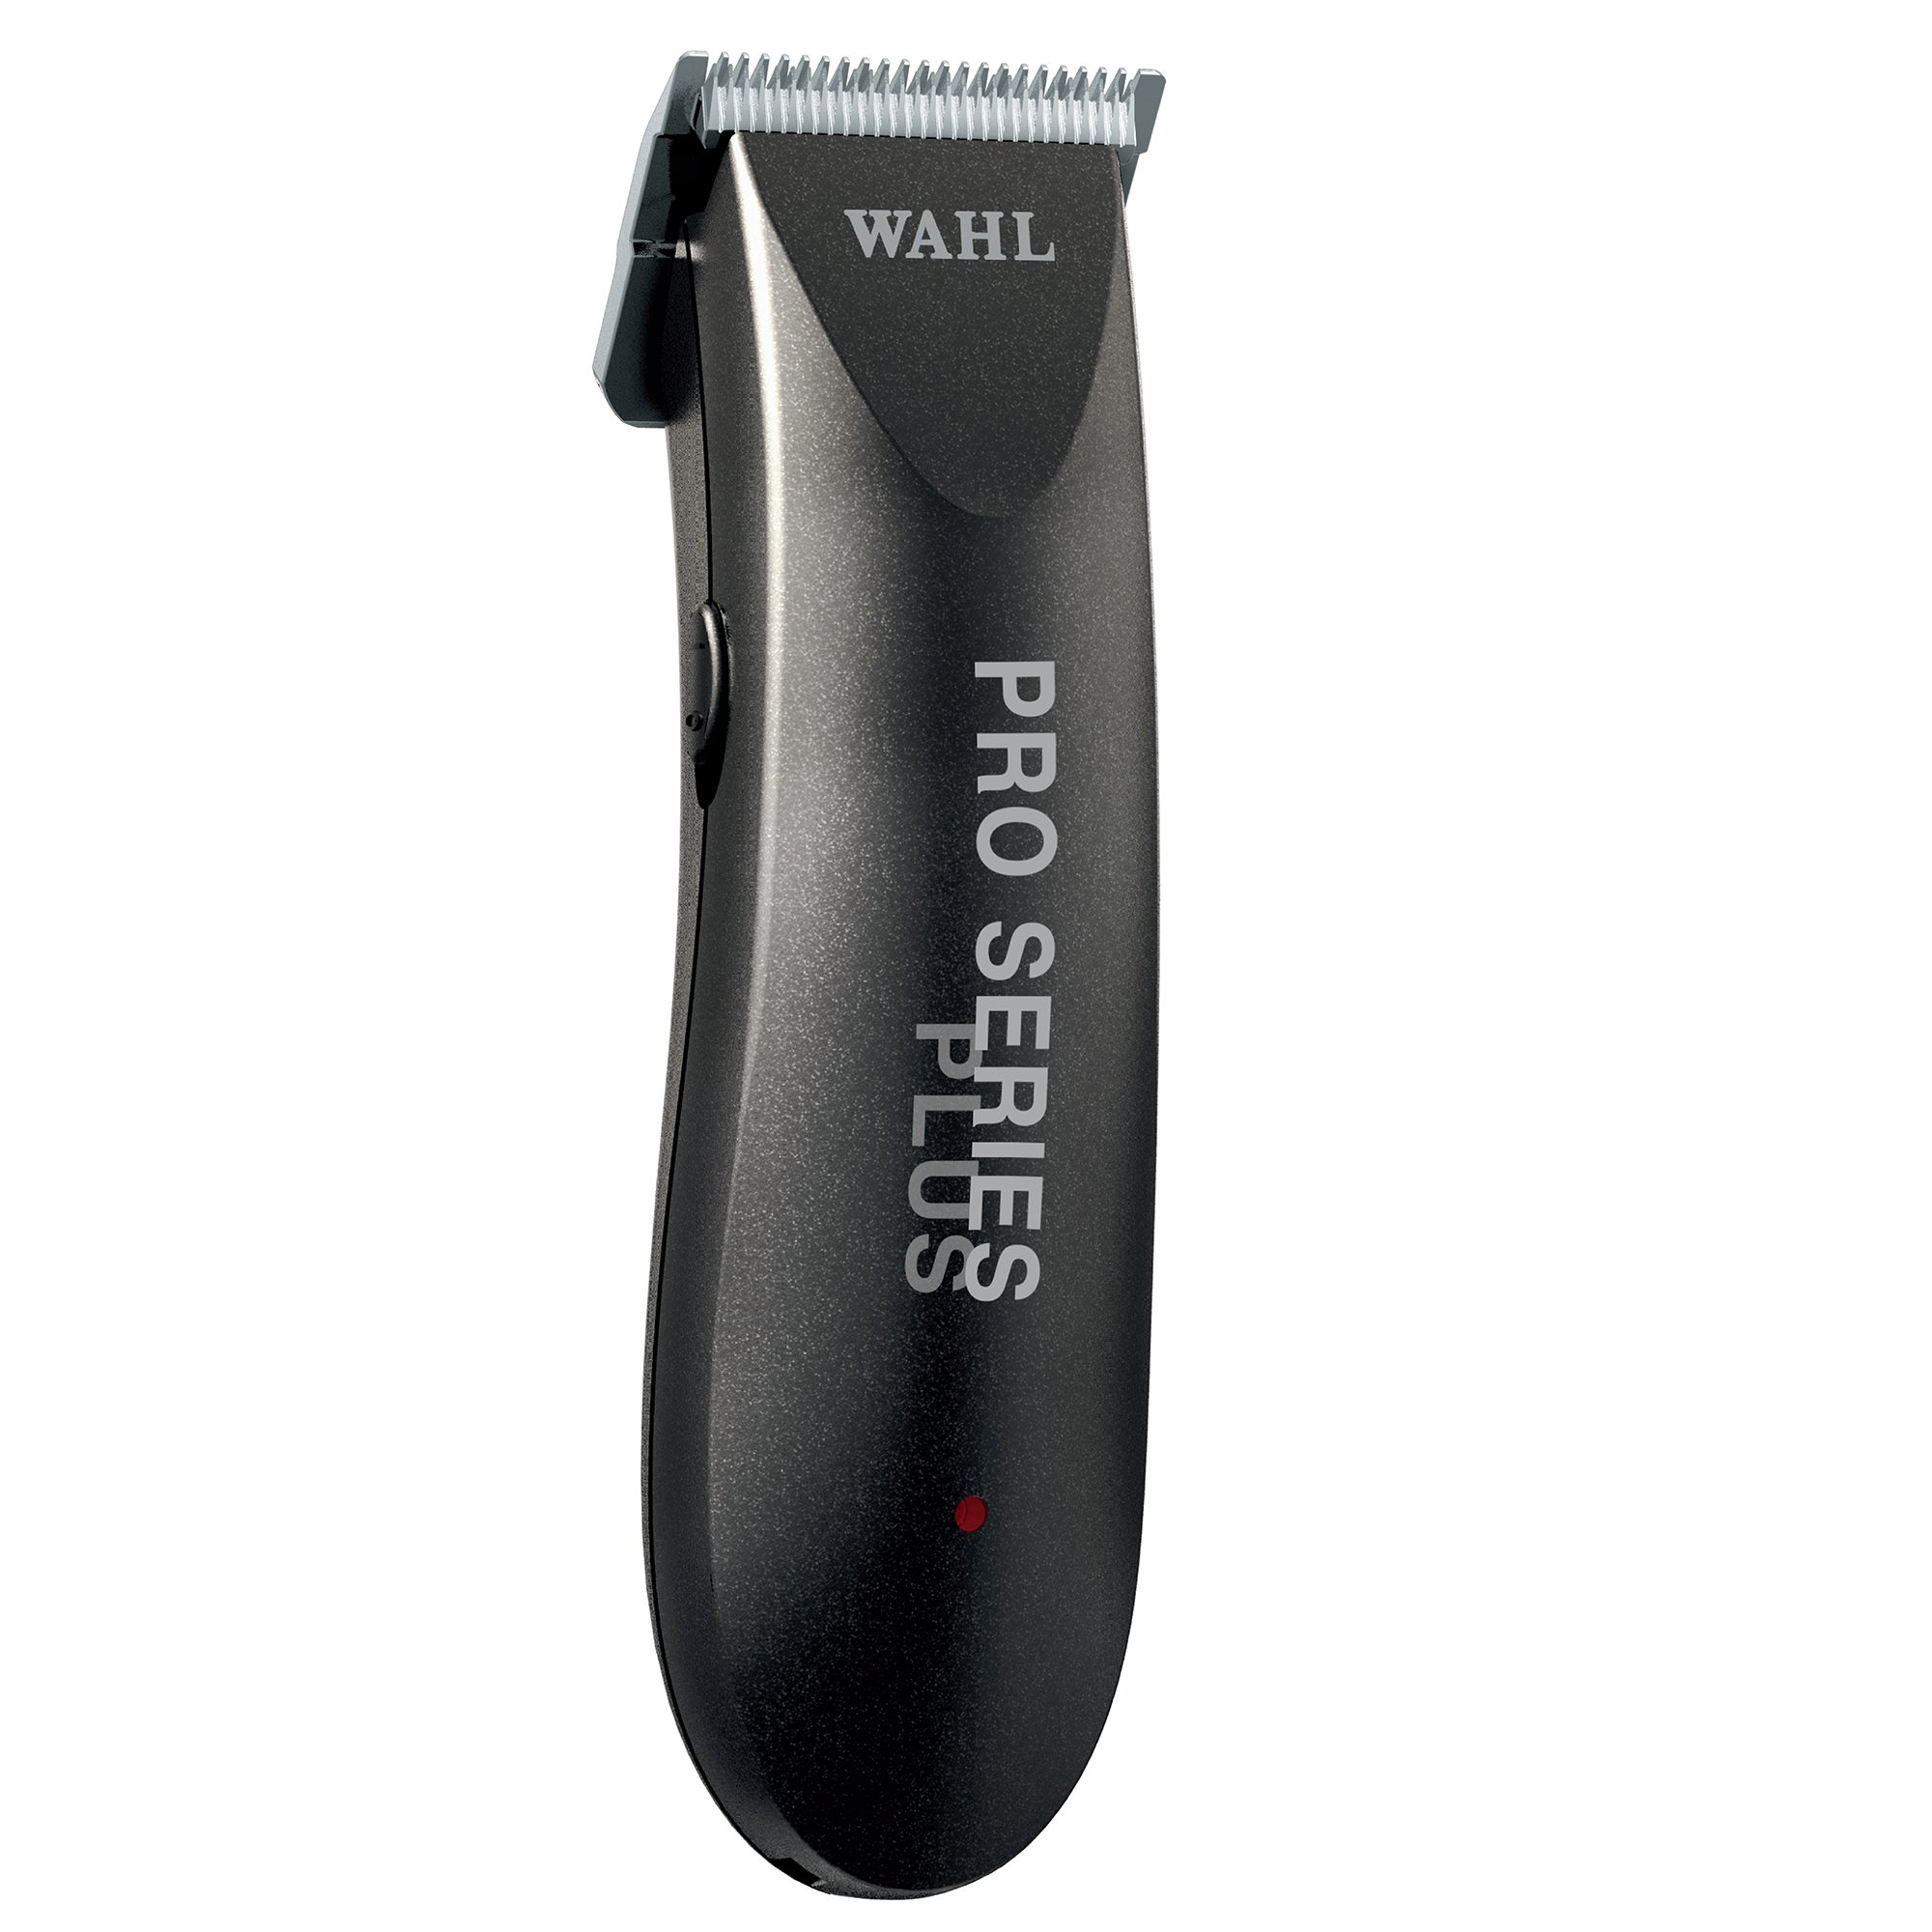 WAHL Professional Animal Pro Series Plus Equine Cordless Horse Clipper and Grooming Kit (#8550-2401) (Discontinued by Manufactur